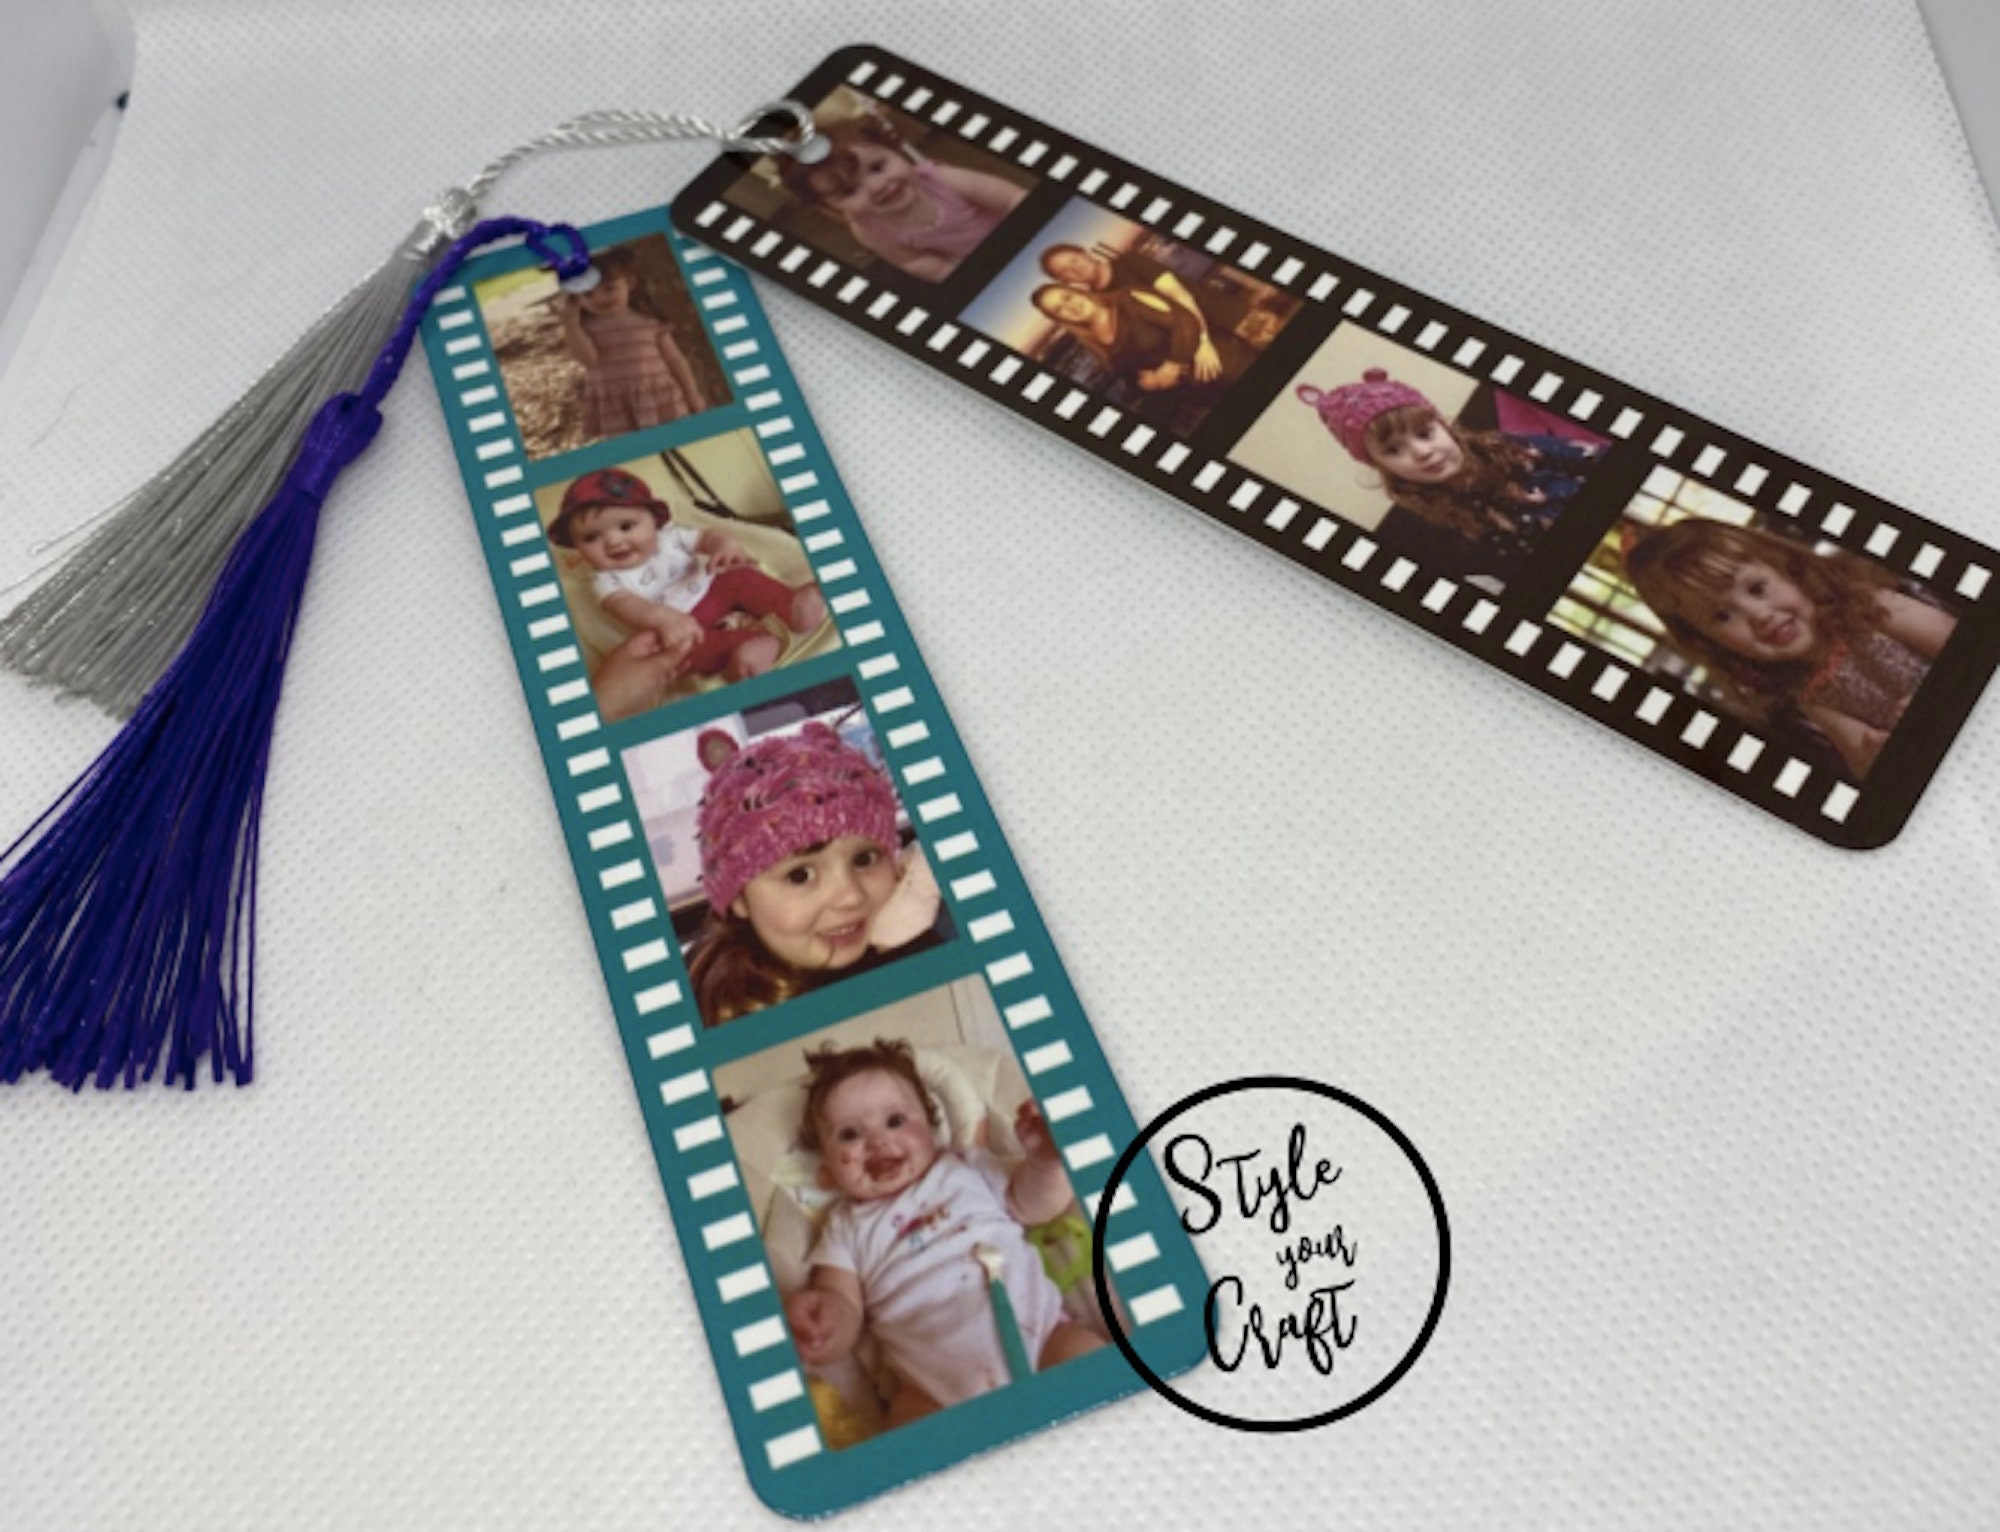 Bookmark Sleeves With Inserts for Photo Booth Premium Vinyl, FREE Shipping  